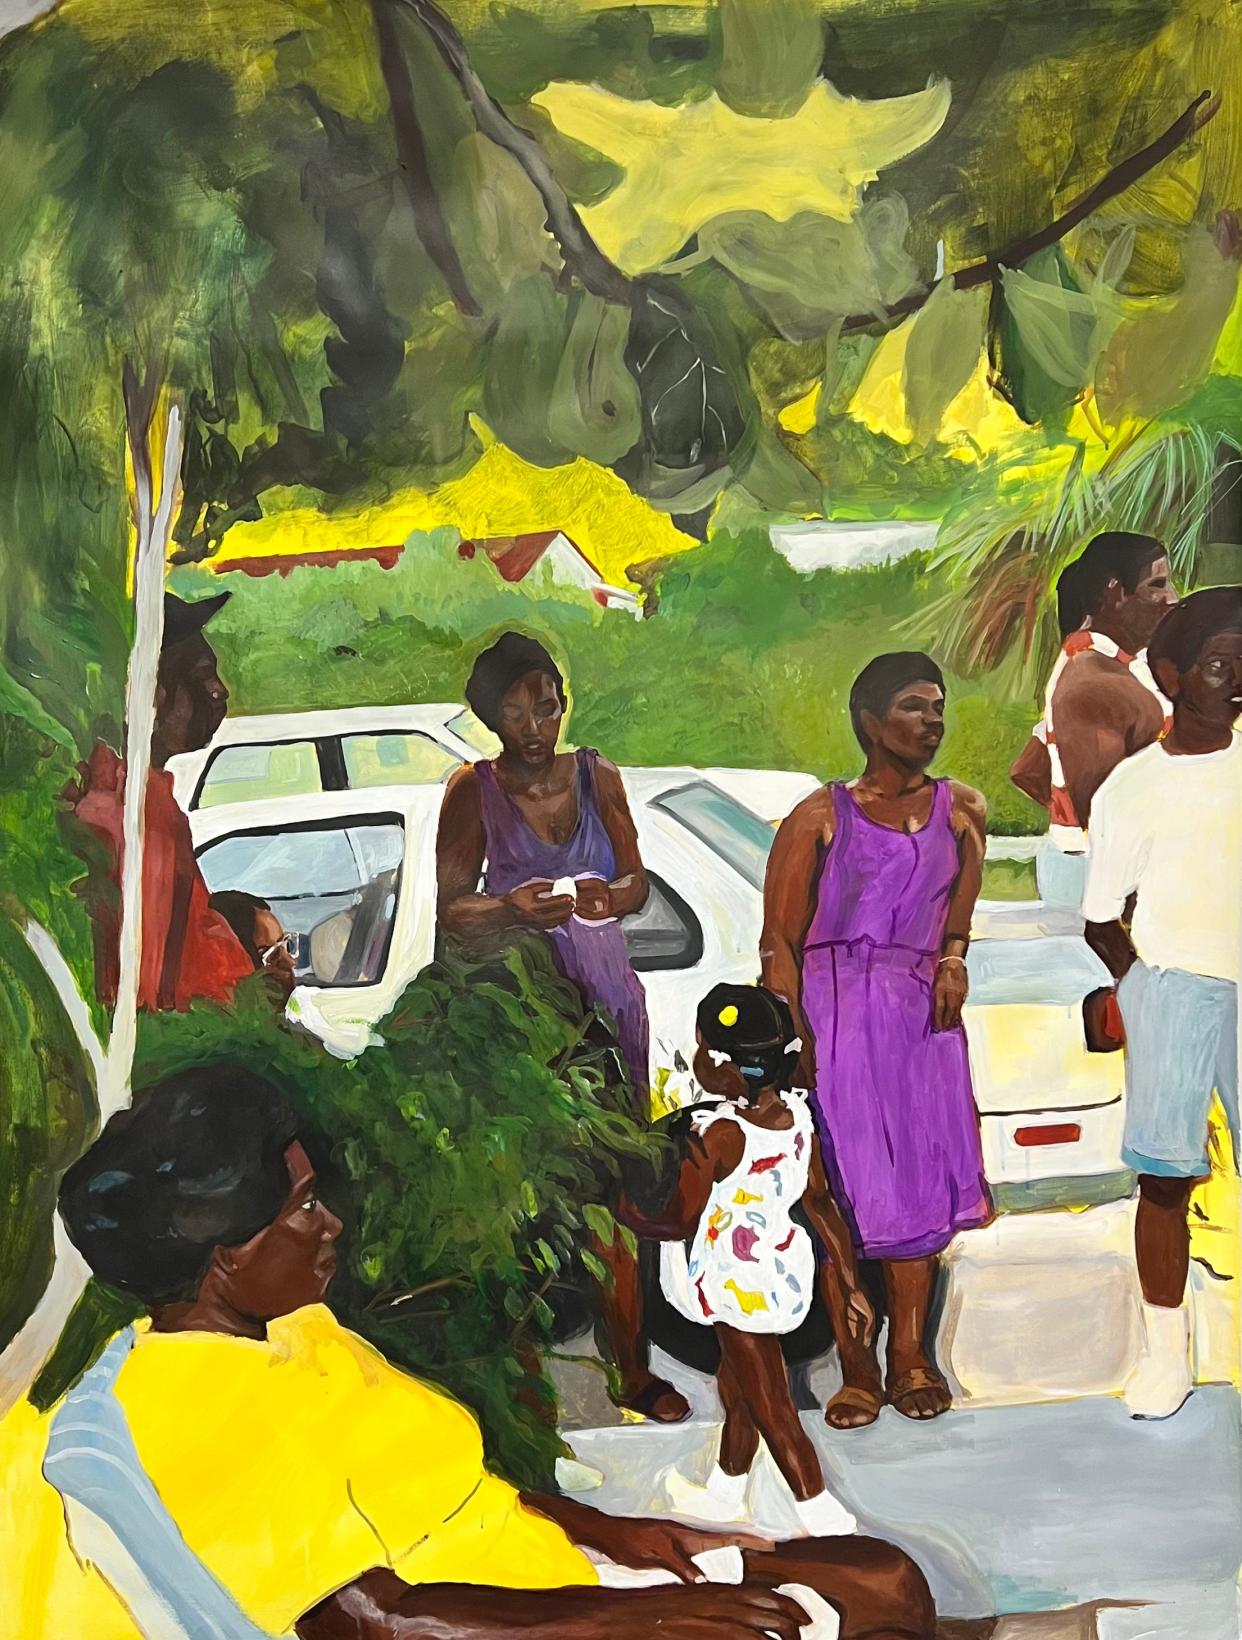 The 2023 Visions in Black exhibition will be presented on Feb. 2-25. Dandria Carey’s “Reunion” will be featured at the Arts and Cultural Alliance of Sarasota County.